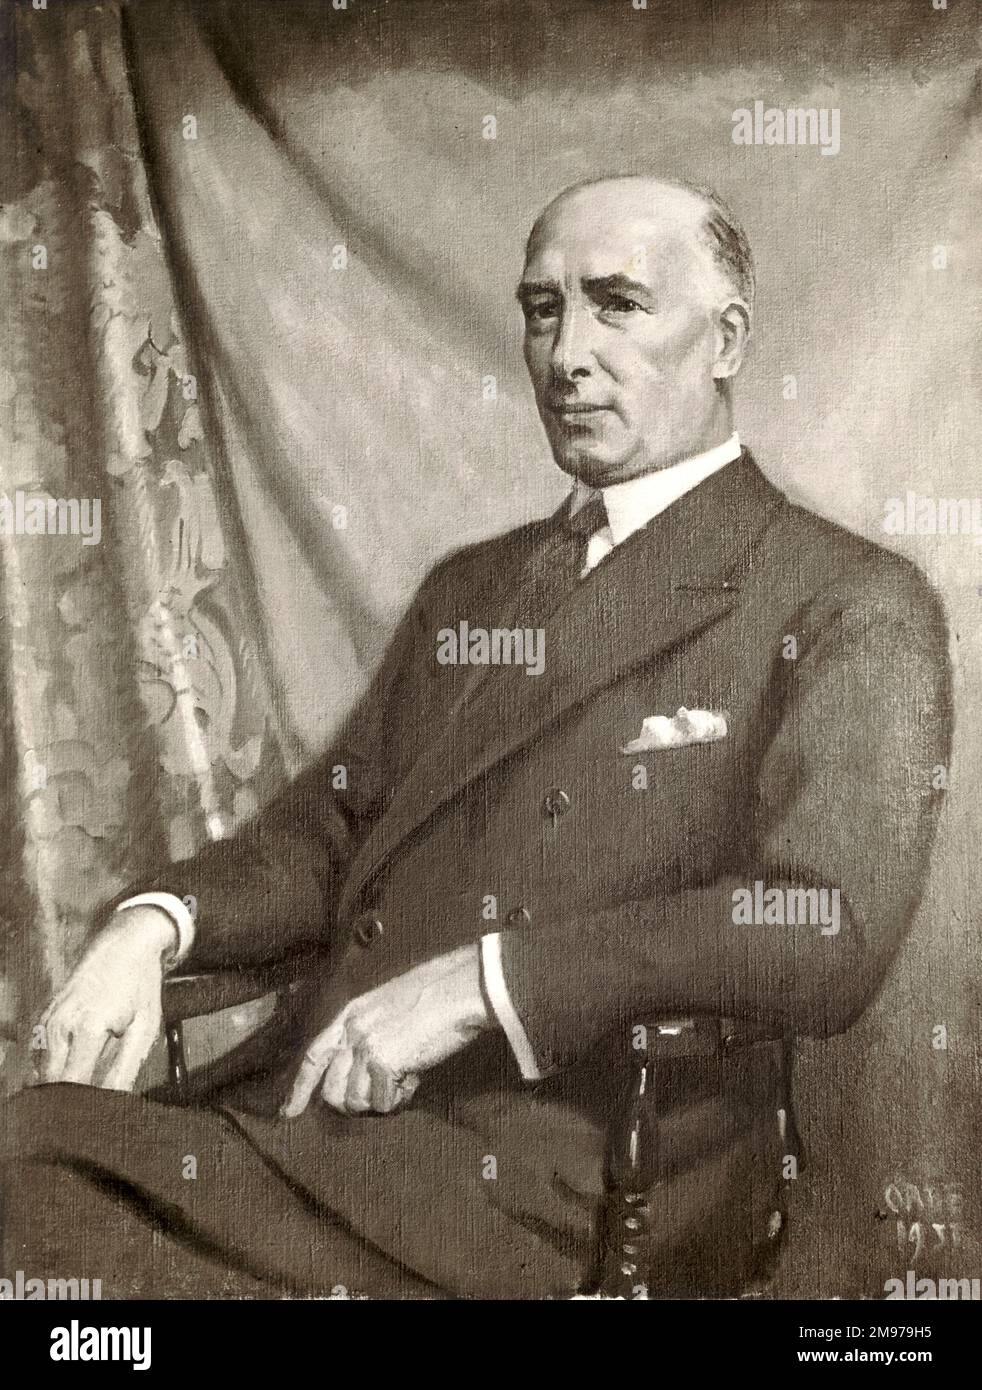 Portrait of Lord Weir of Eastwood, 1877-1959, RAeS President. Stock Photo